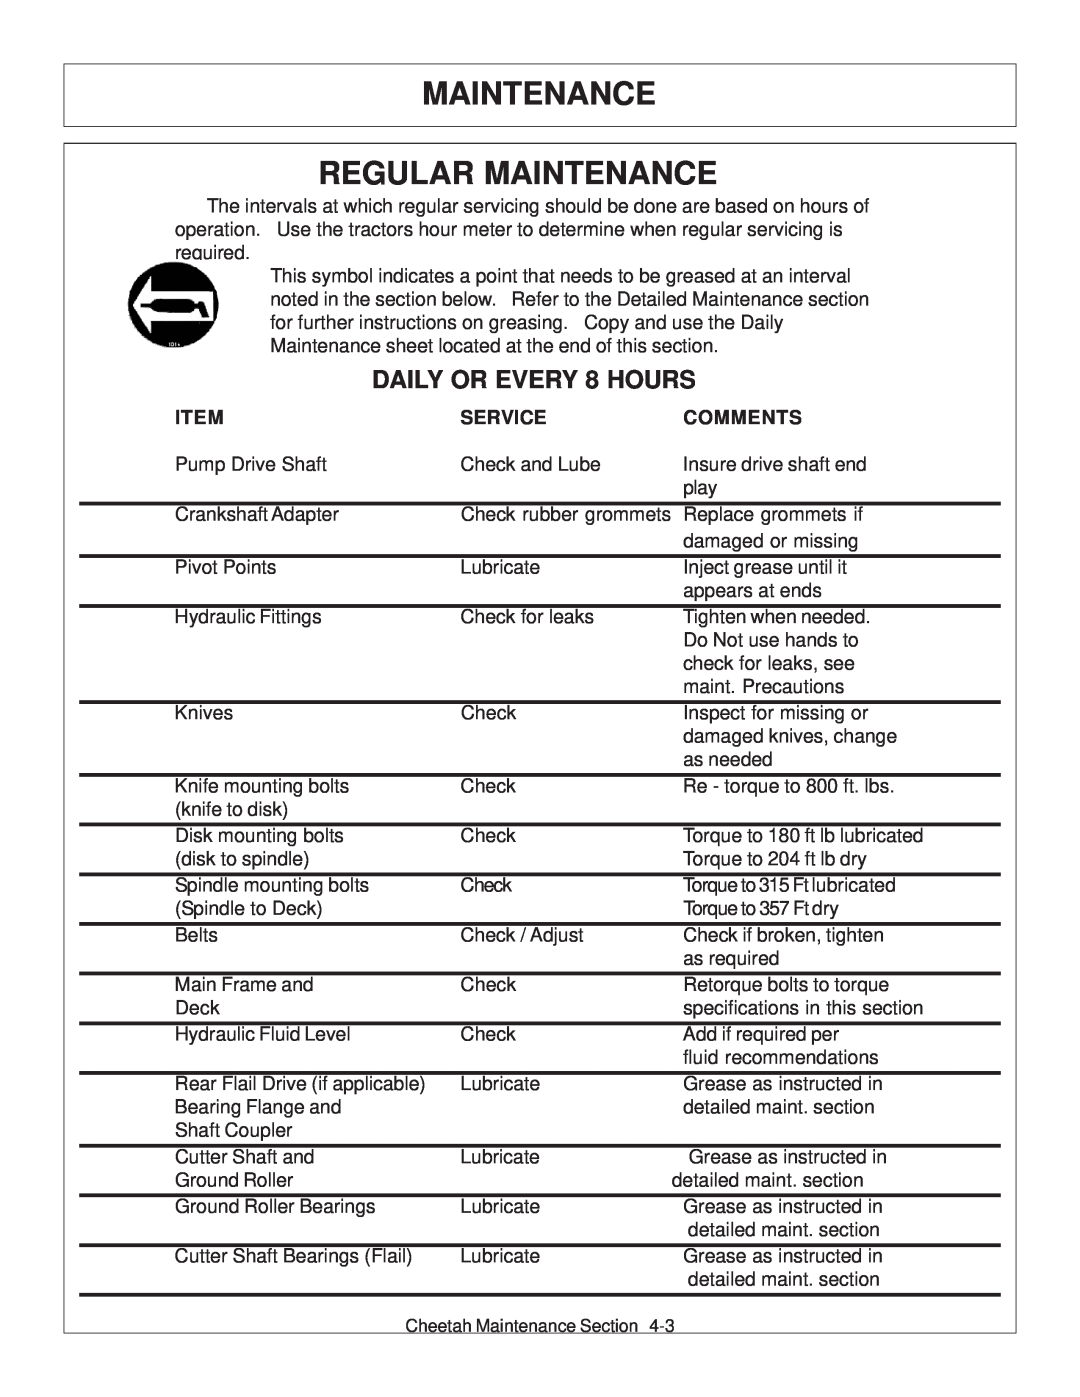 Tiger Products Co., Ltd JD 5101E, JD 5083E manual Maintenance Regular Maintenance, DAILY OR EVERY 8 HOURS, Service, Comments 